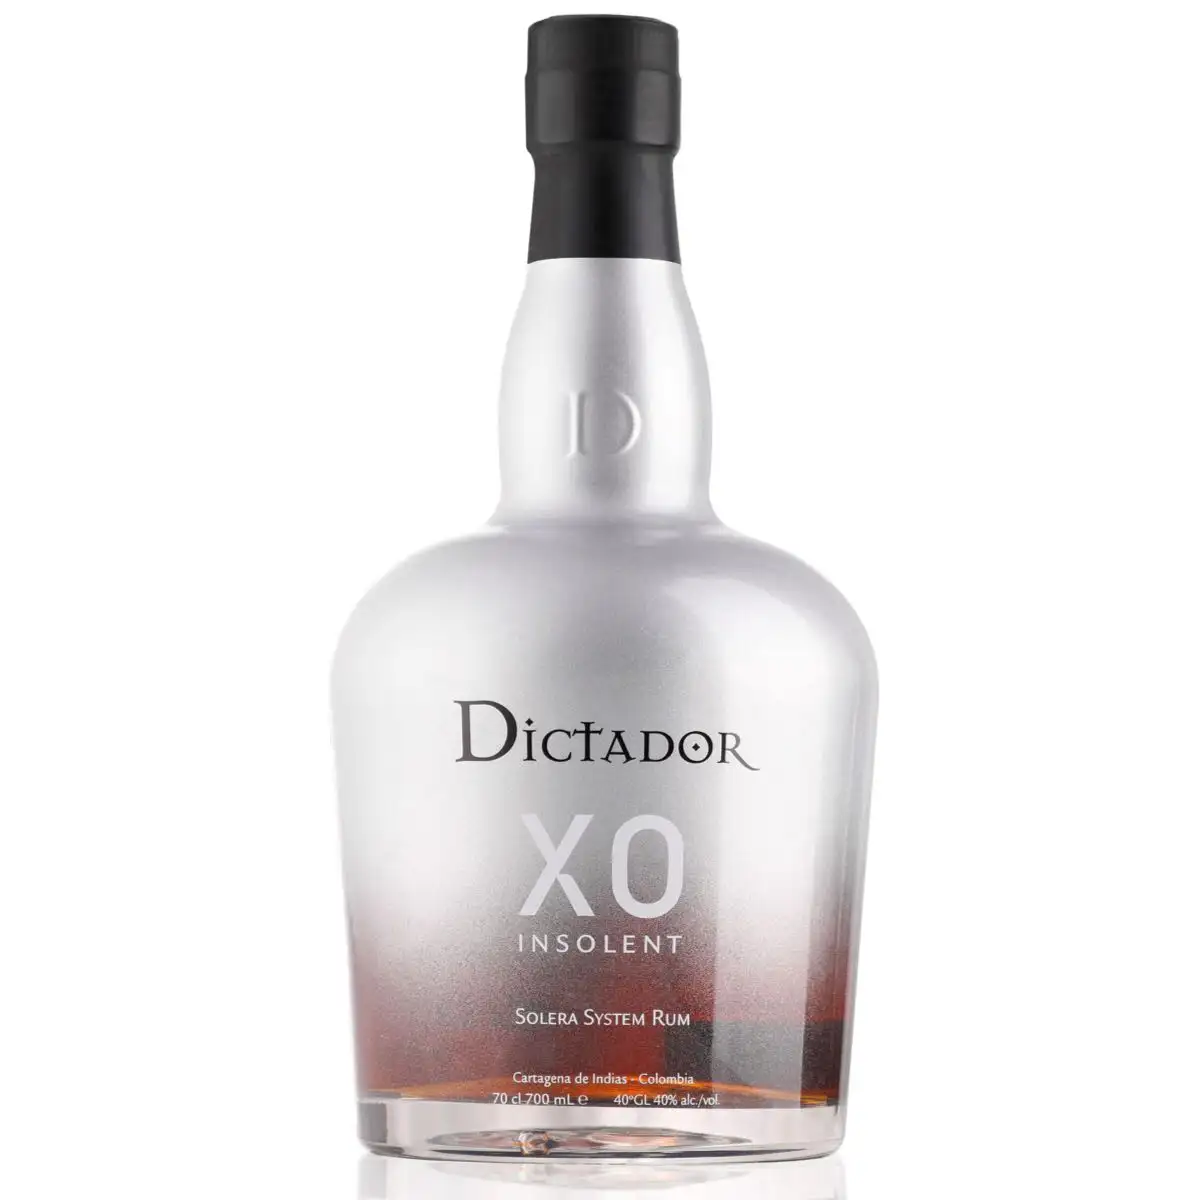 Image of the front of the bottle of the rum Dictador XO Insolent / Platinum